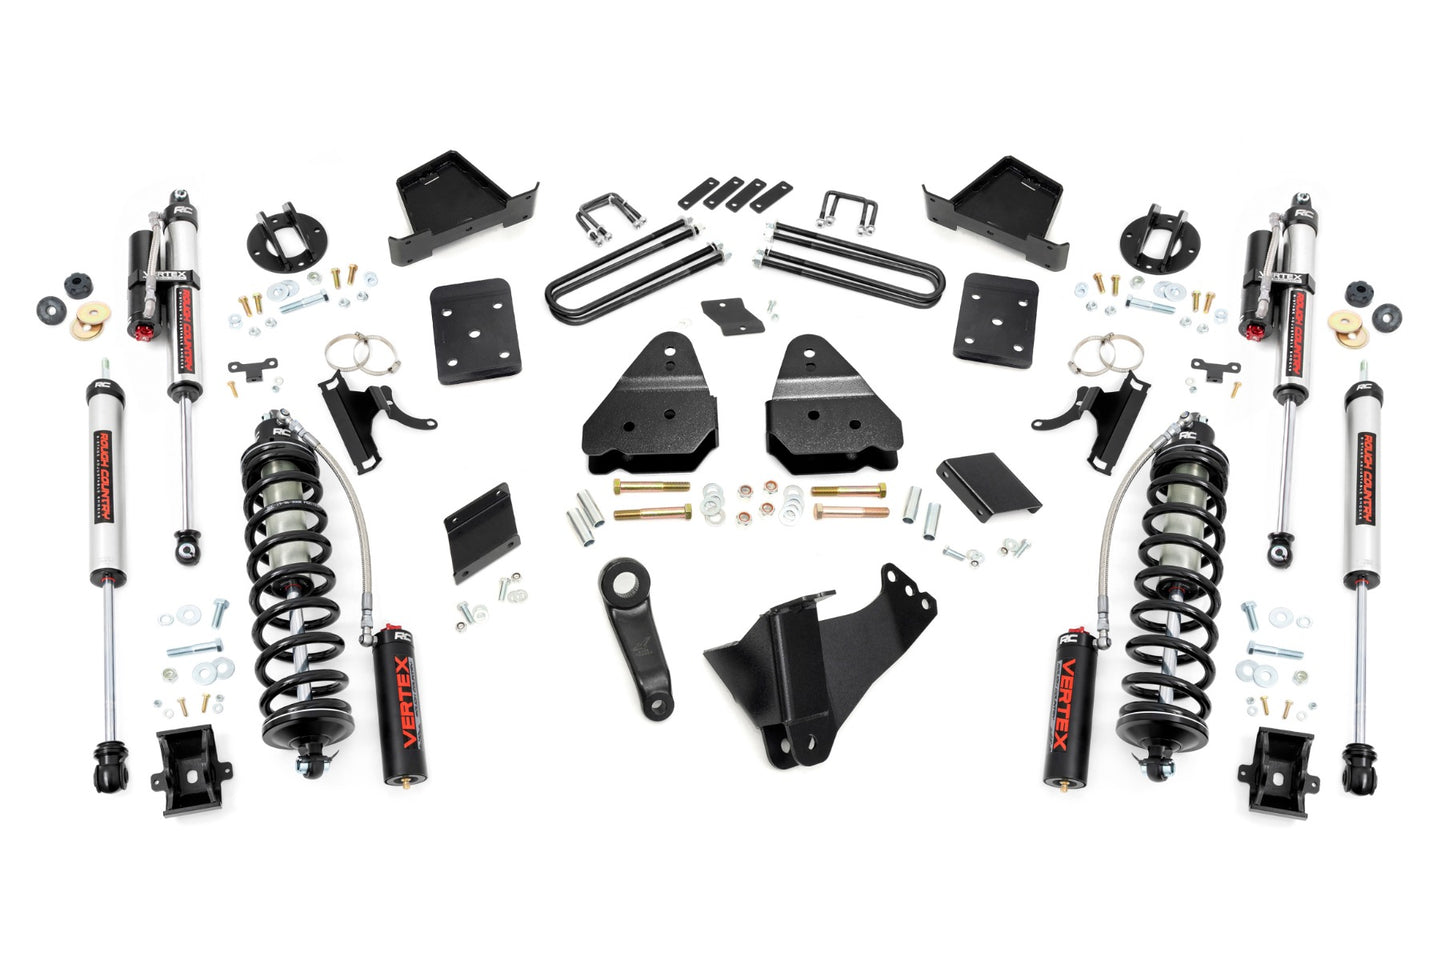 Rough Country (54859) 6 Inch Lift Kit  |  Diesel  |  OVLD  |  C/O Vertex | Ford F-250 Super Duty (15-16)